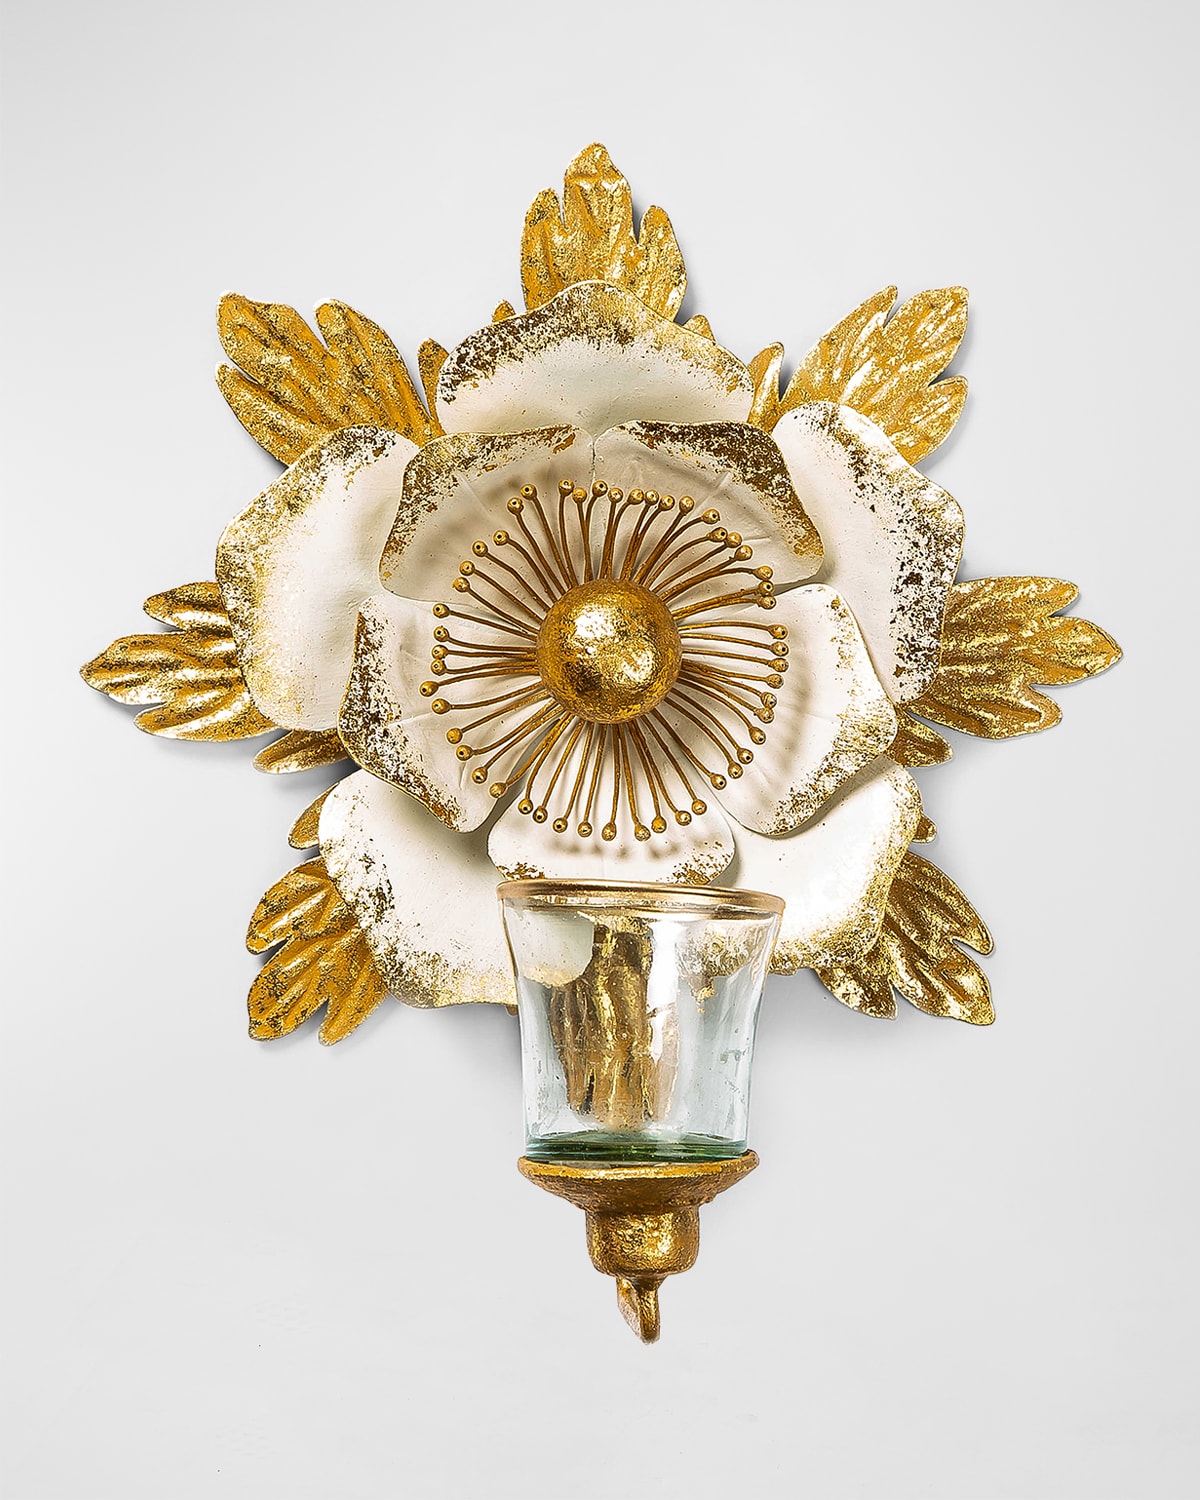 MACKENZIE-CHILDS GOLDEN ANEMONE CANDLE SCONCE